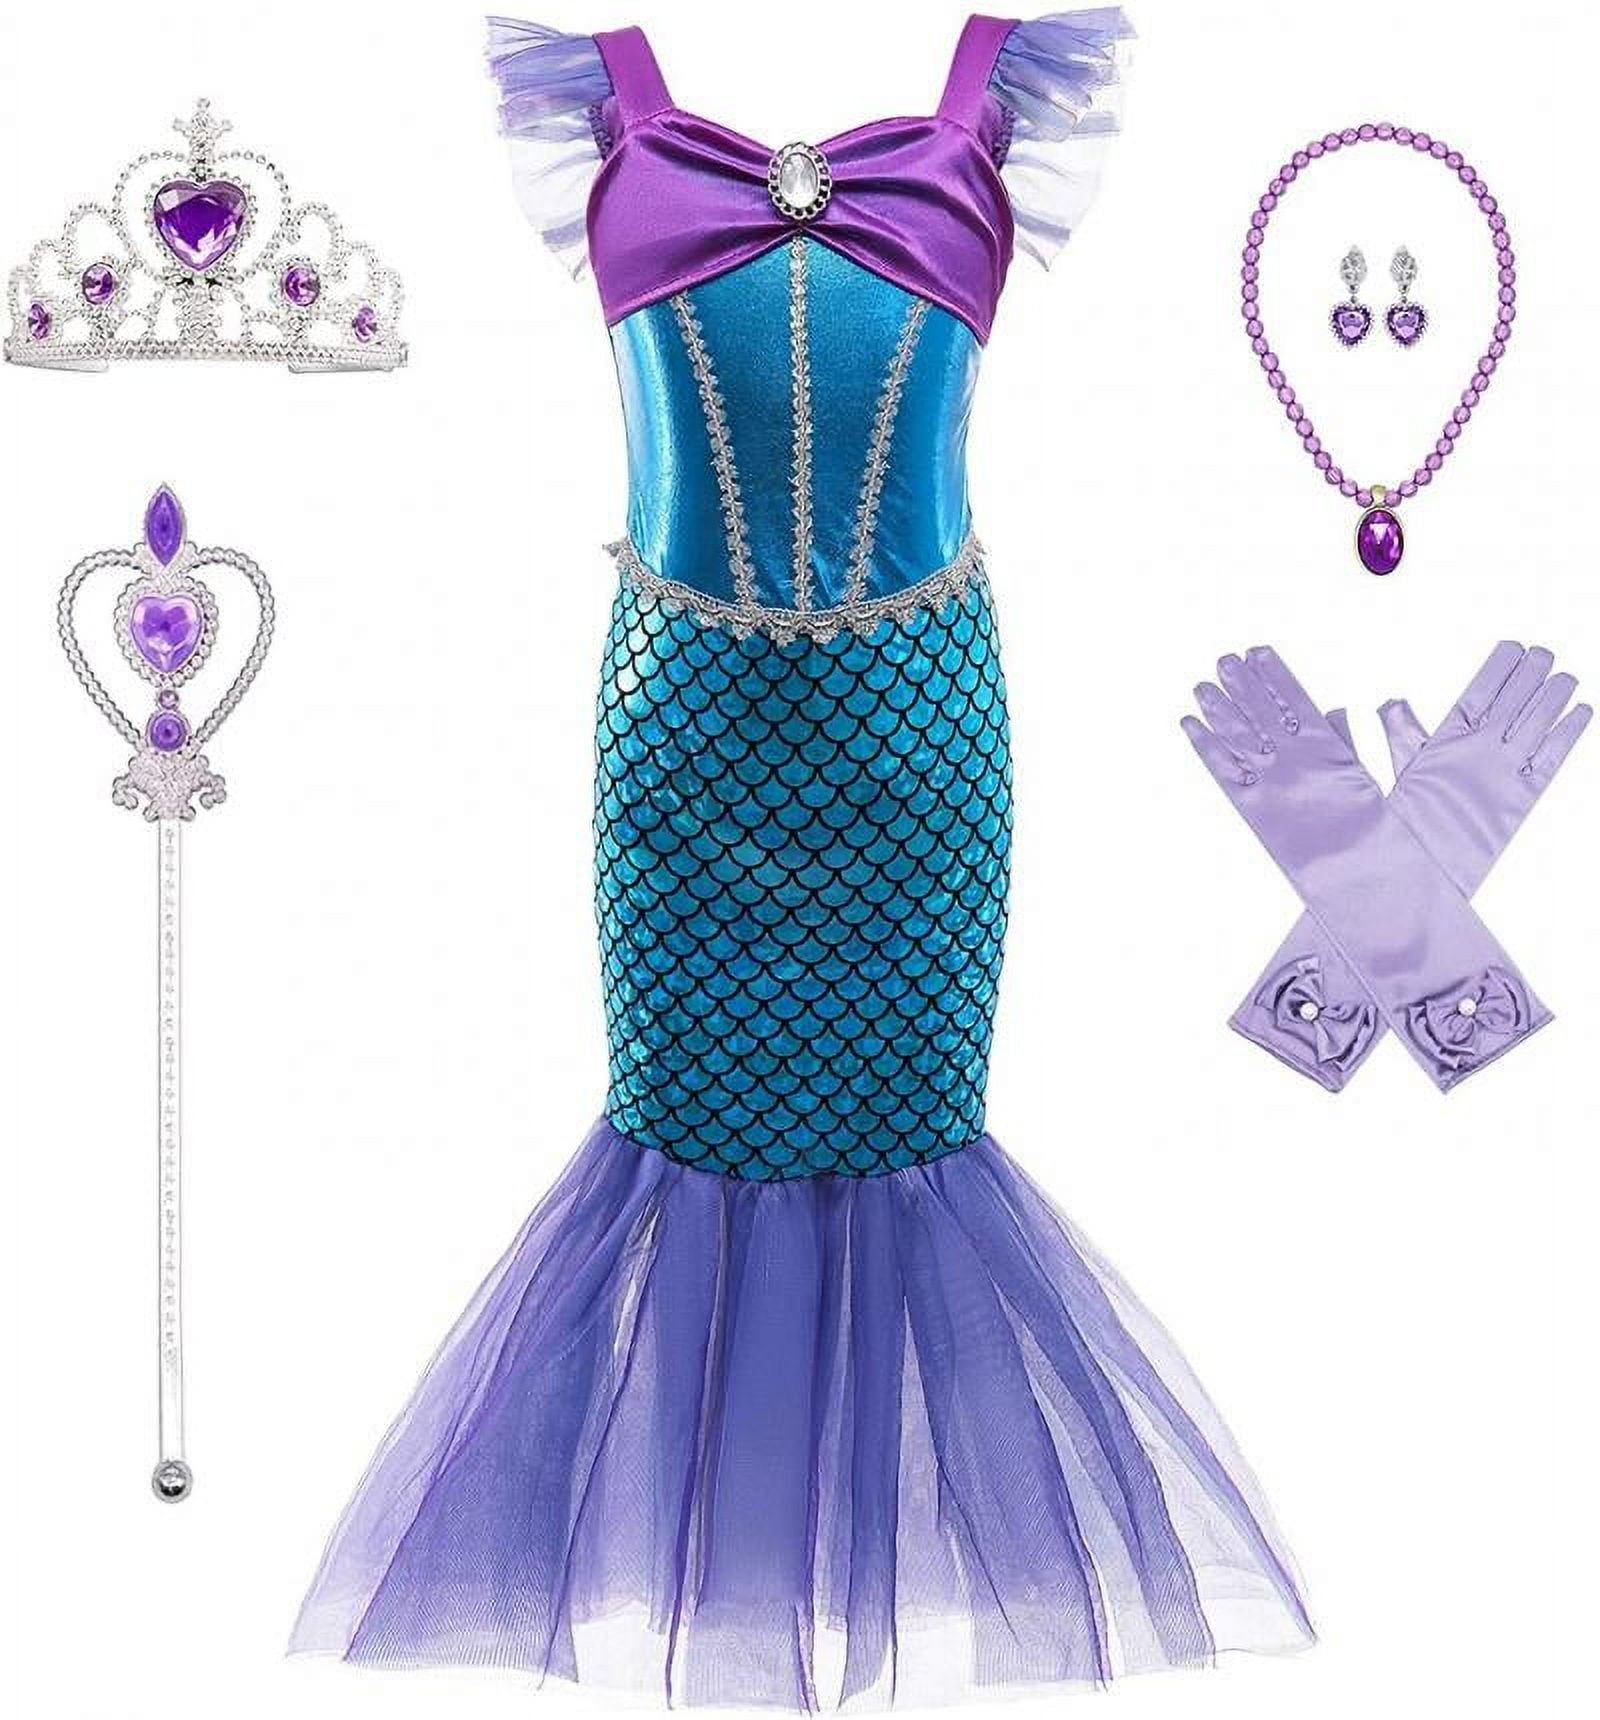 GUILON Little Mermaid Costume Ariel Dress for Toddler Grils Birthday Party